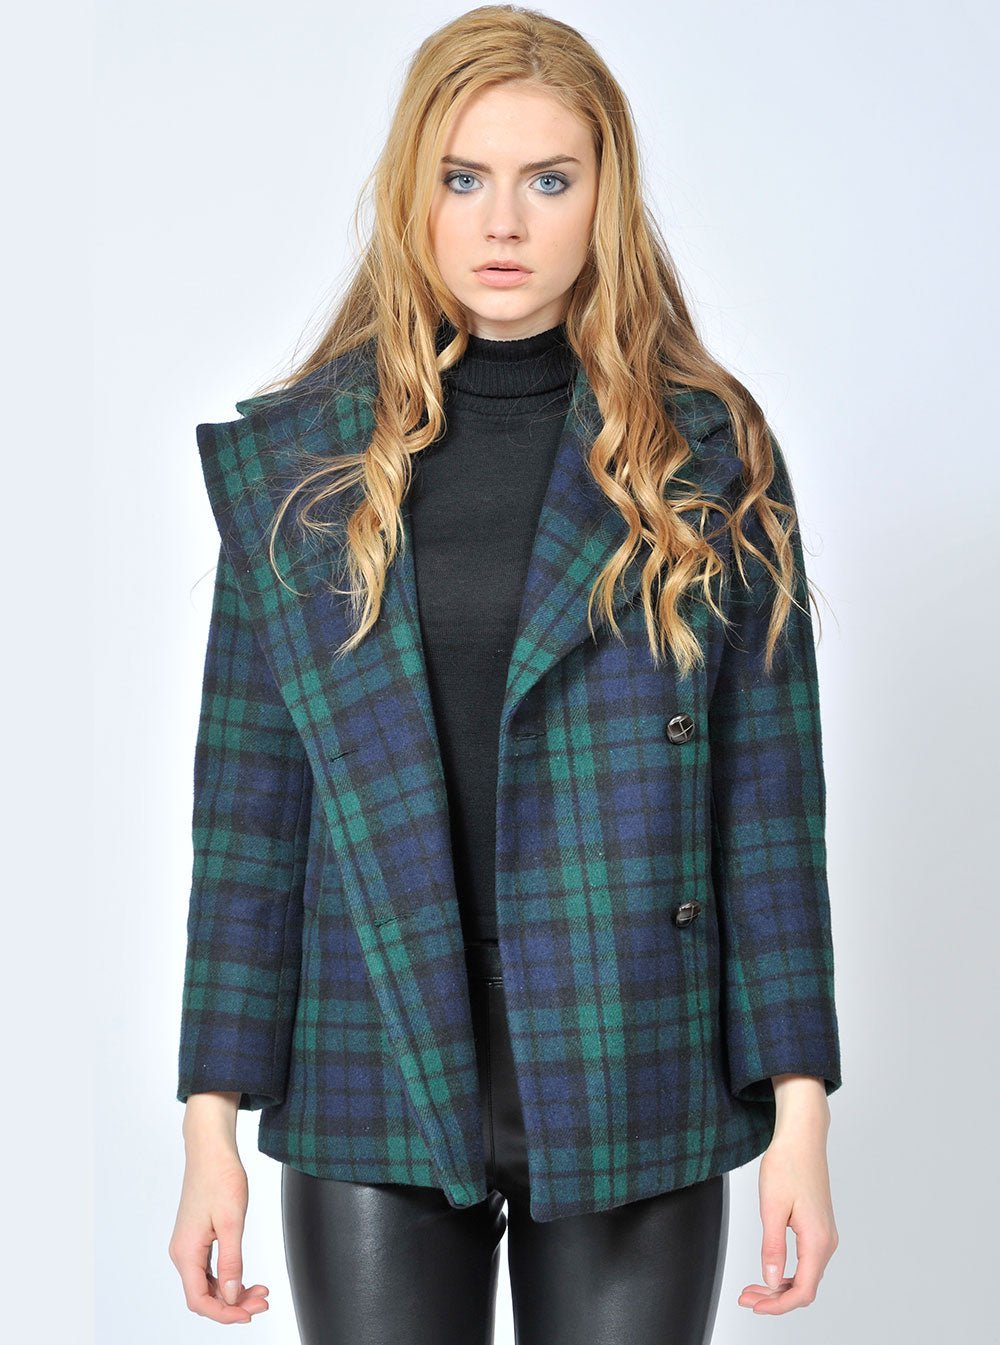 Essex Coat - Pink Martini Collection